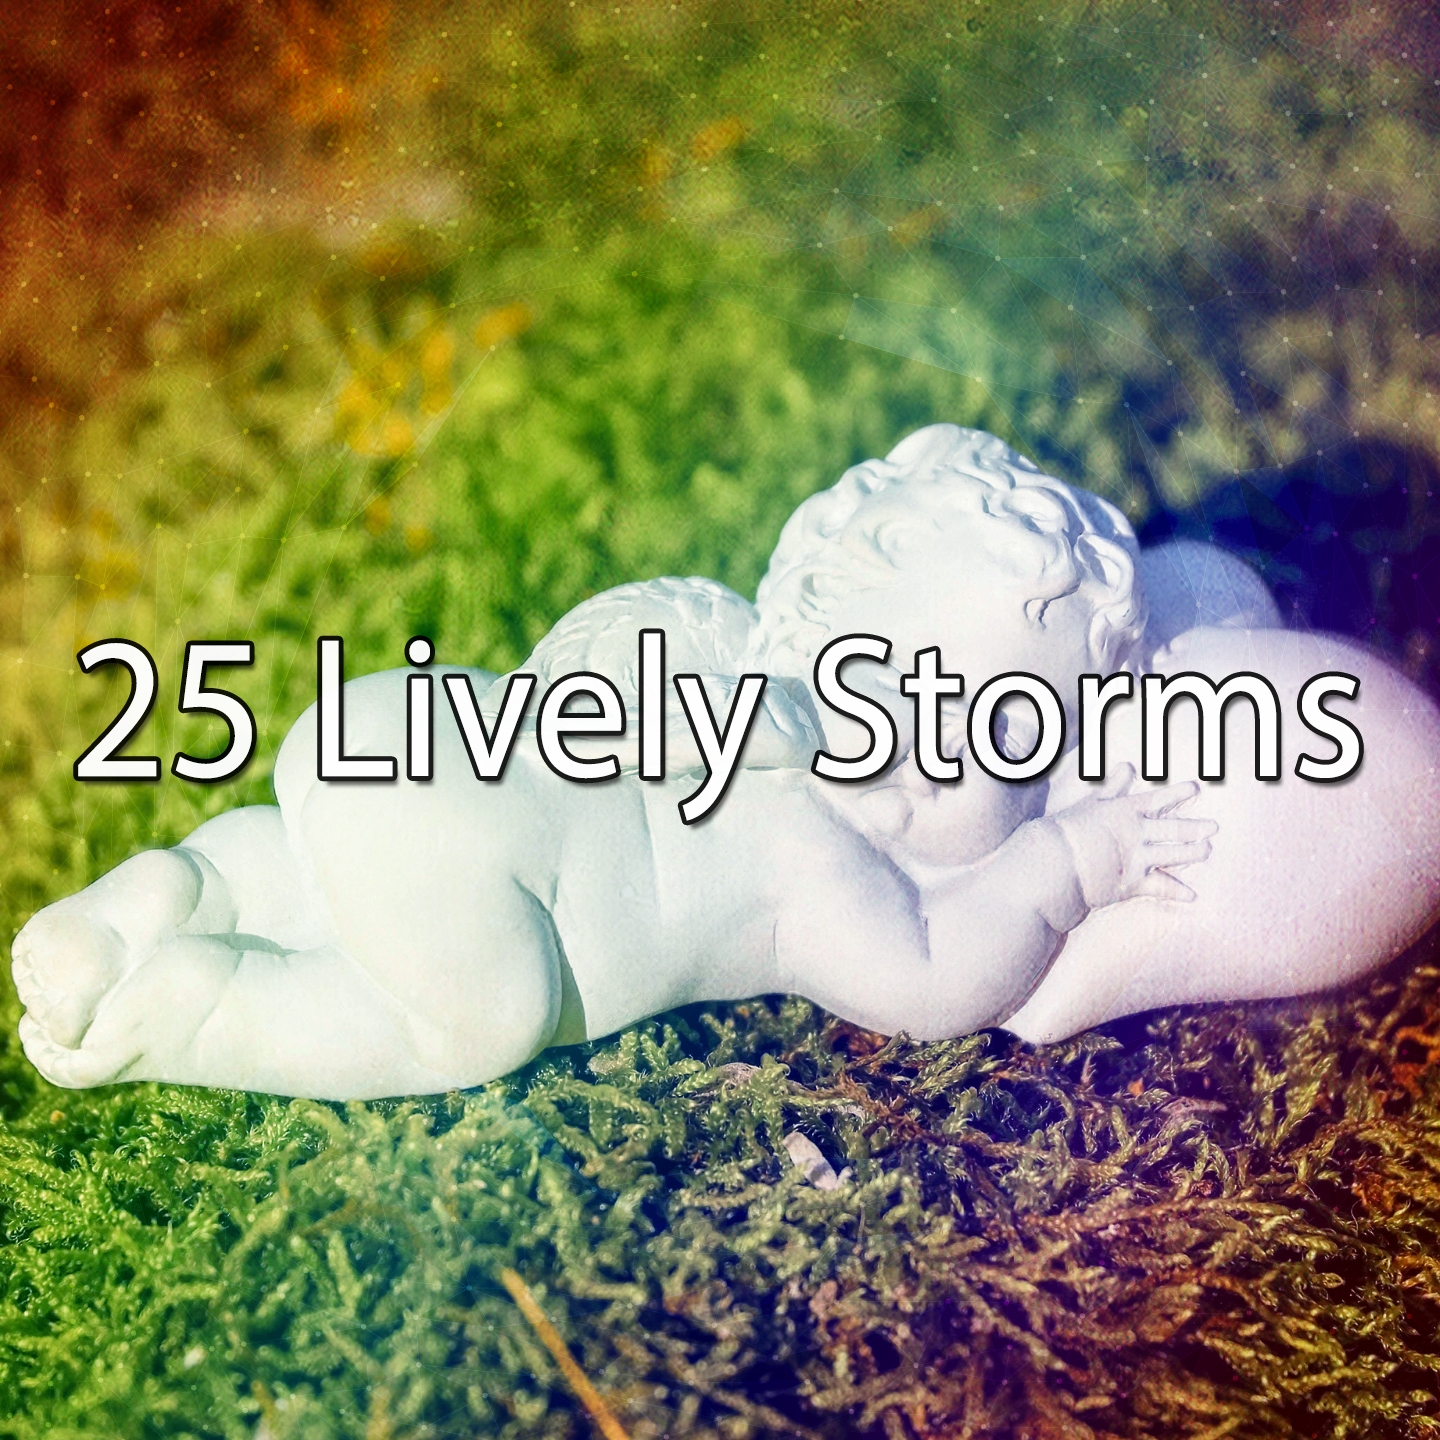 25 Lively Storms